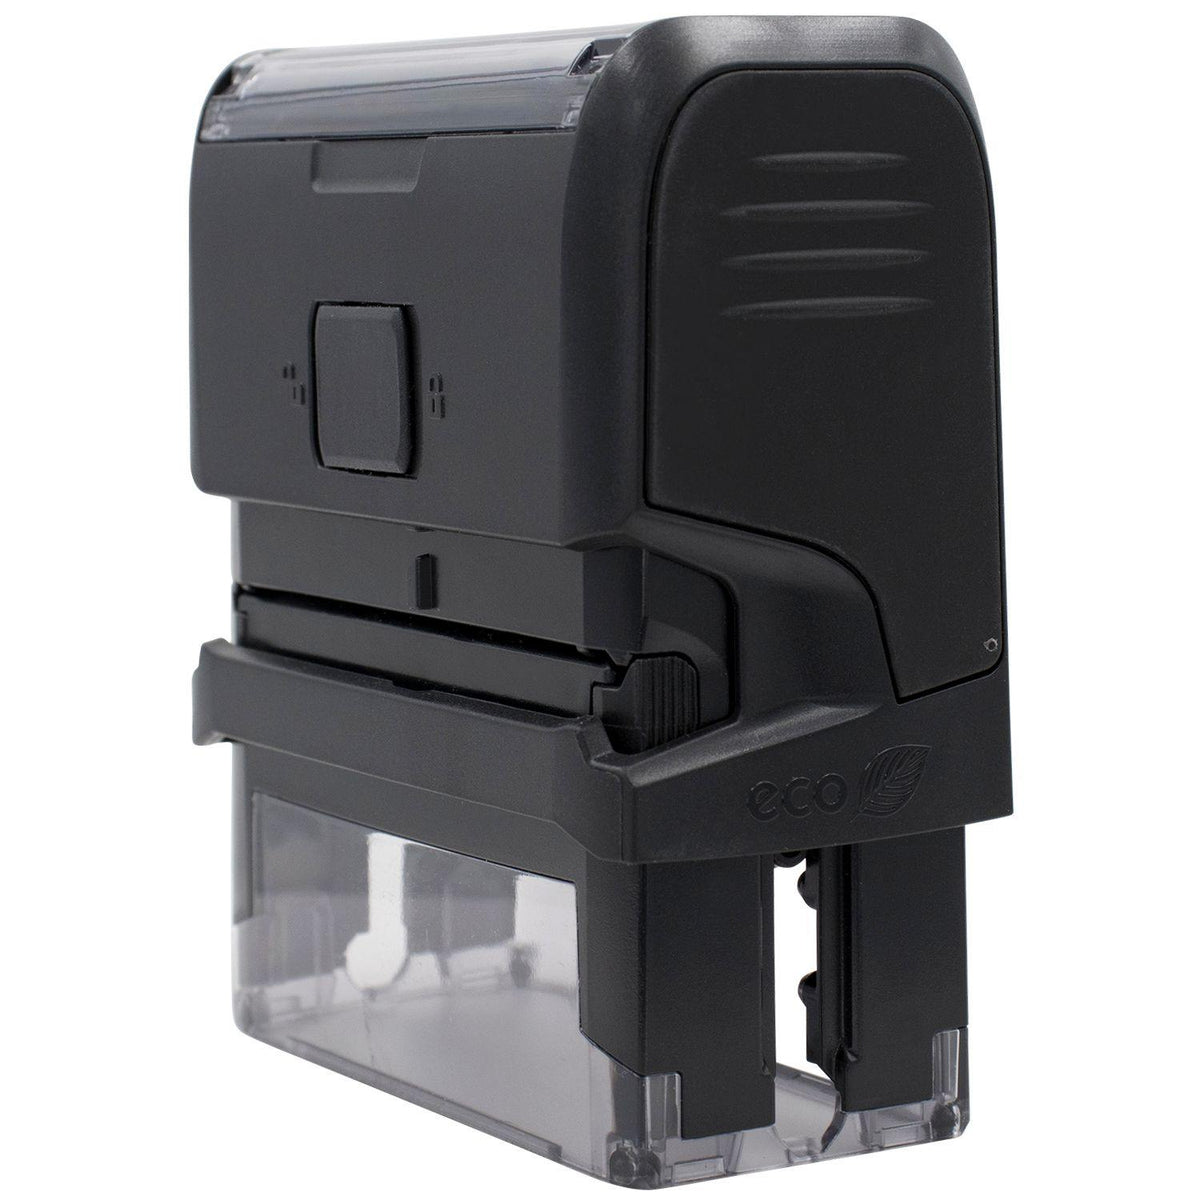 Self-Inking Bold Rough Draft Stamp - Engineer Seal Stamps - Brand_Trodat, Impression Size_Small, Stamp Type_Self-Inking Stamp, Type of Use_General, Type of Use_Office